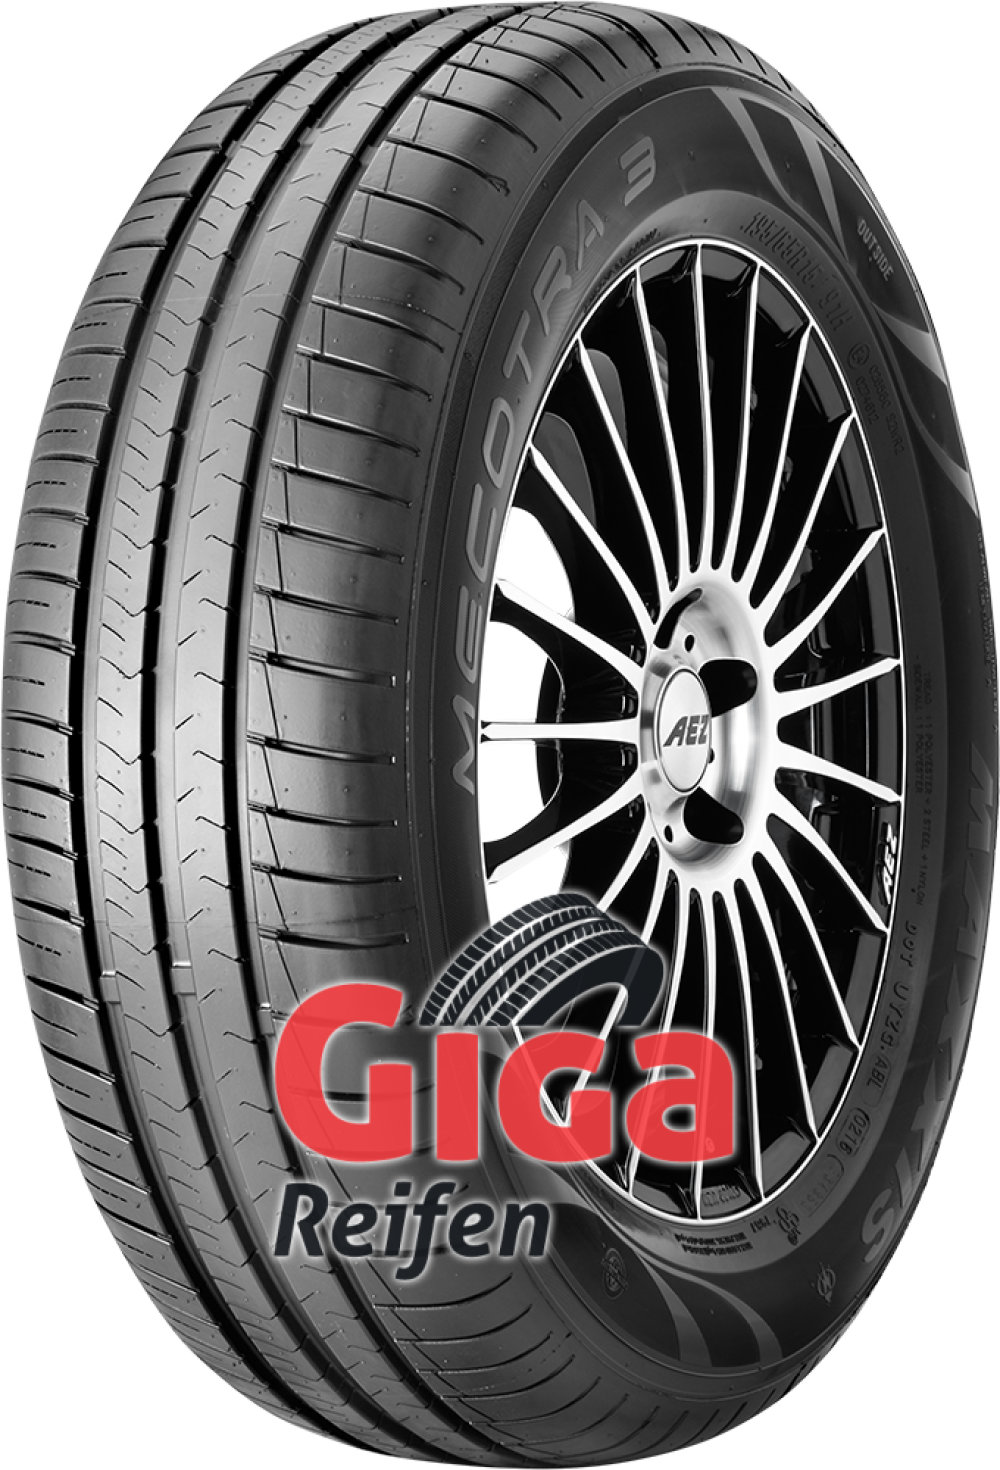 Maxxis Mecotra 3 ( 205/65 R15 94H ) von Maxxis